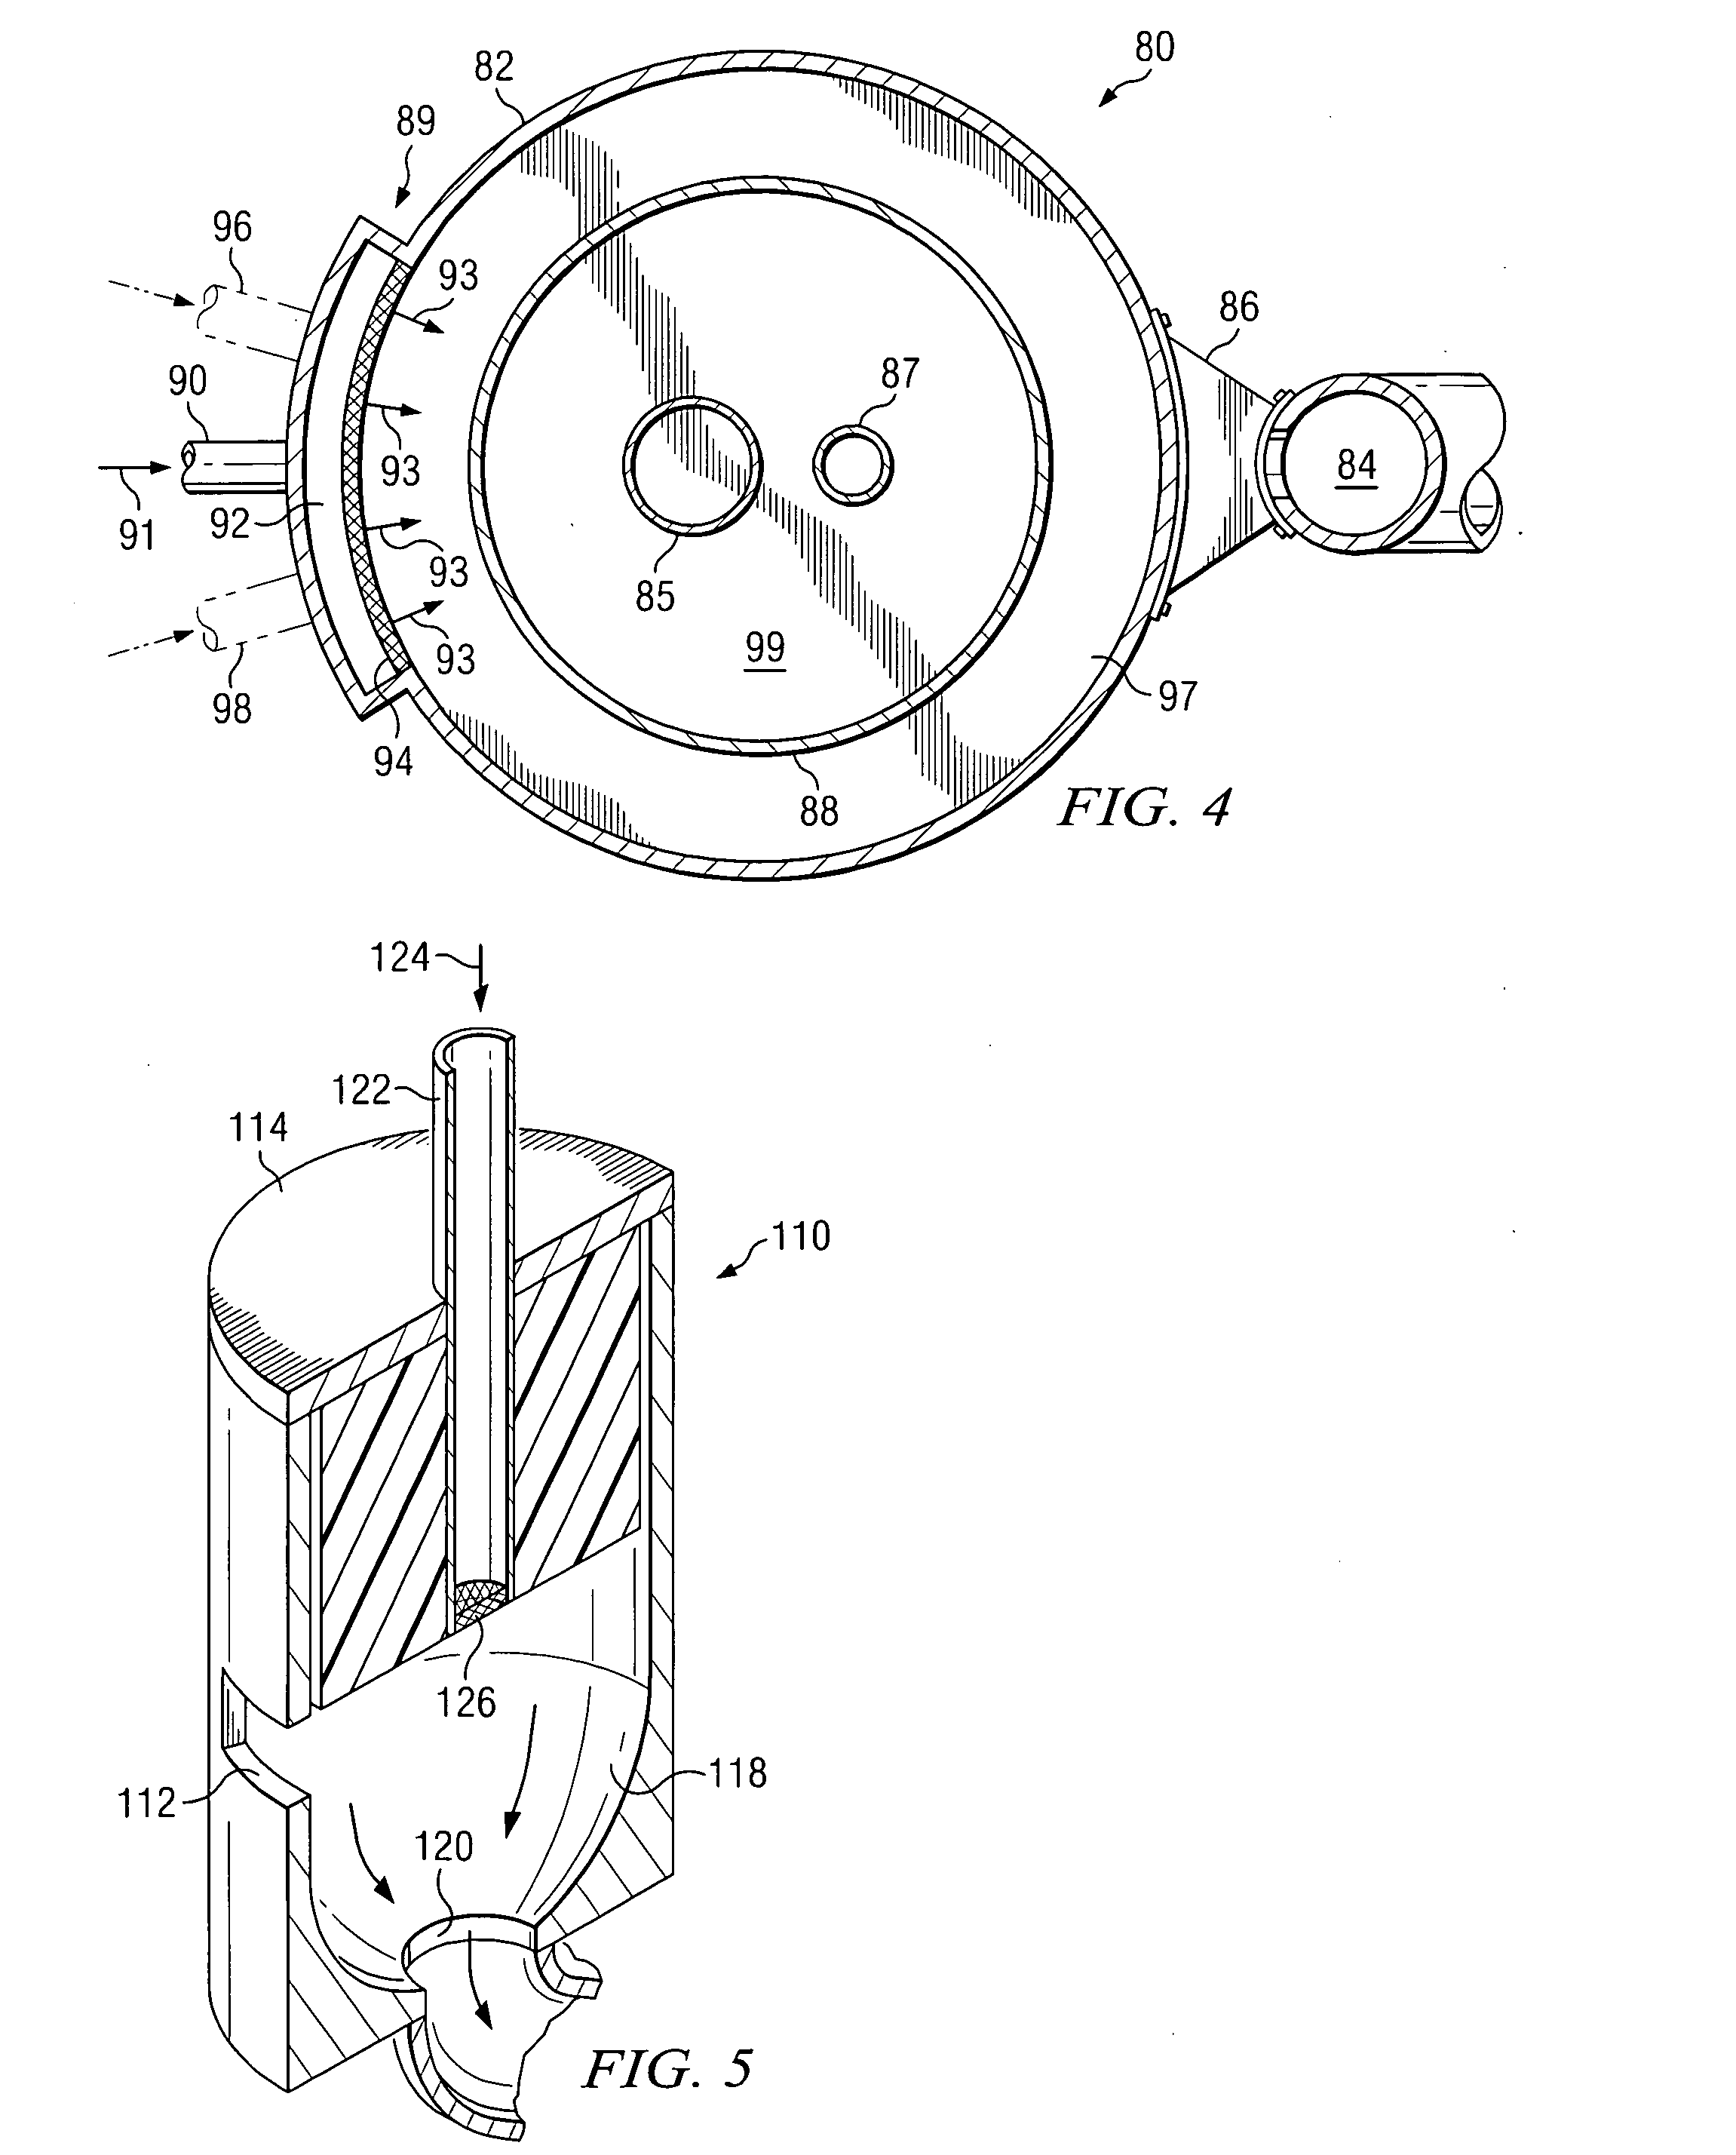 Method and system for generating foam for the manufacture of gypsum products